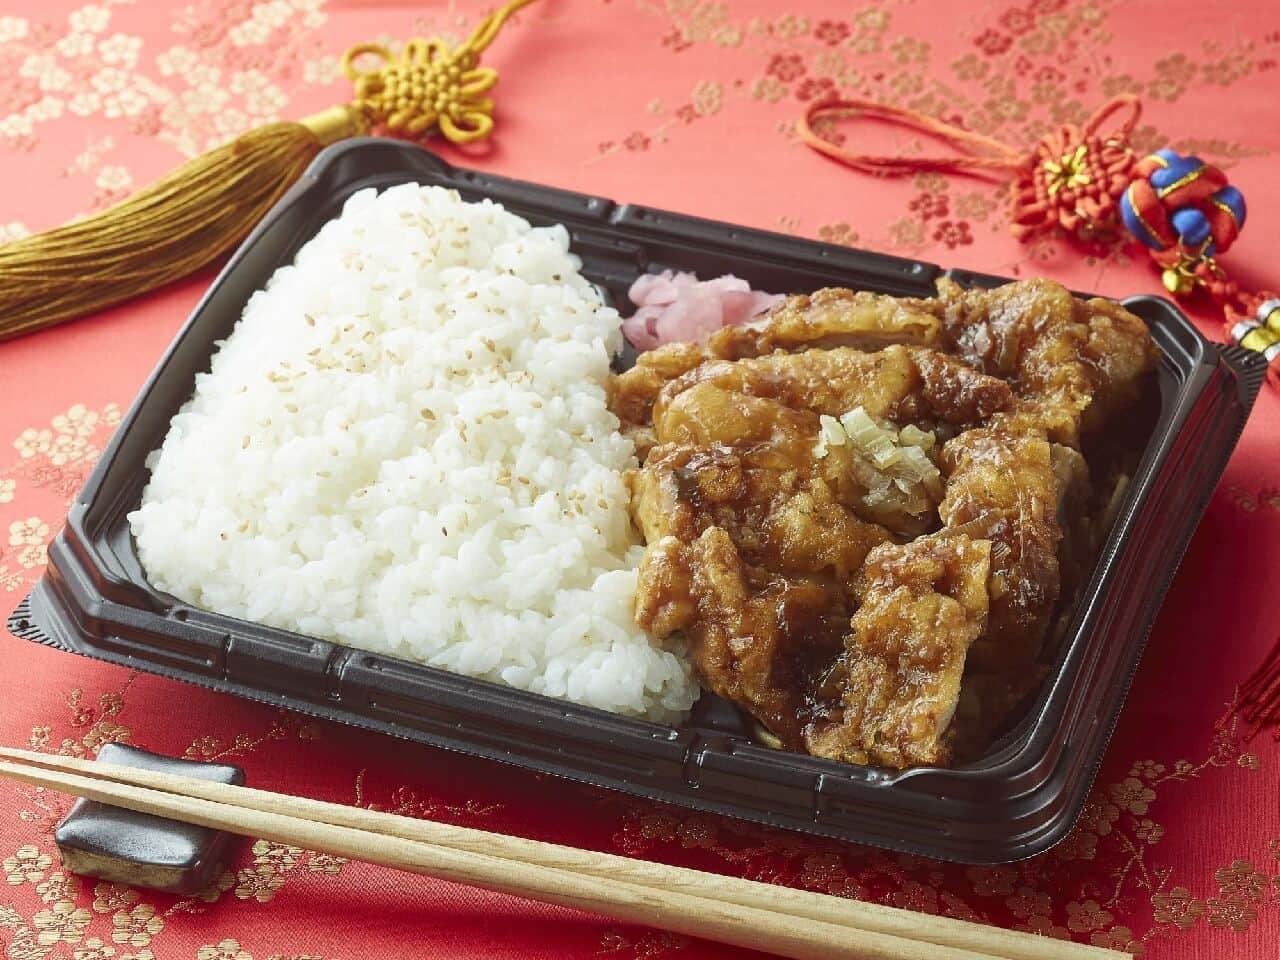 Ministop "Zushiri! Aged Chicken Bento with Vinegar and Sesame Oil" (Japanese only)